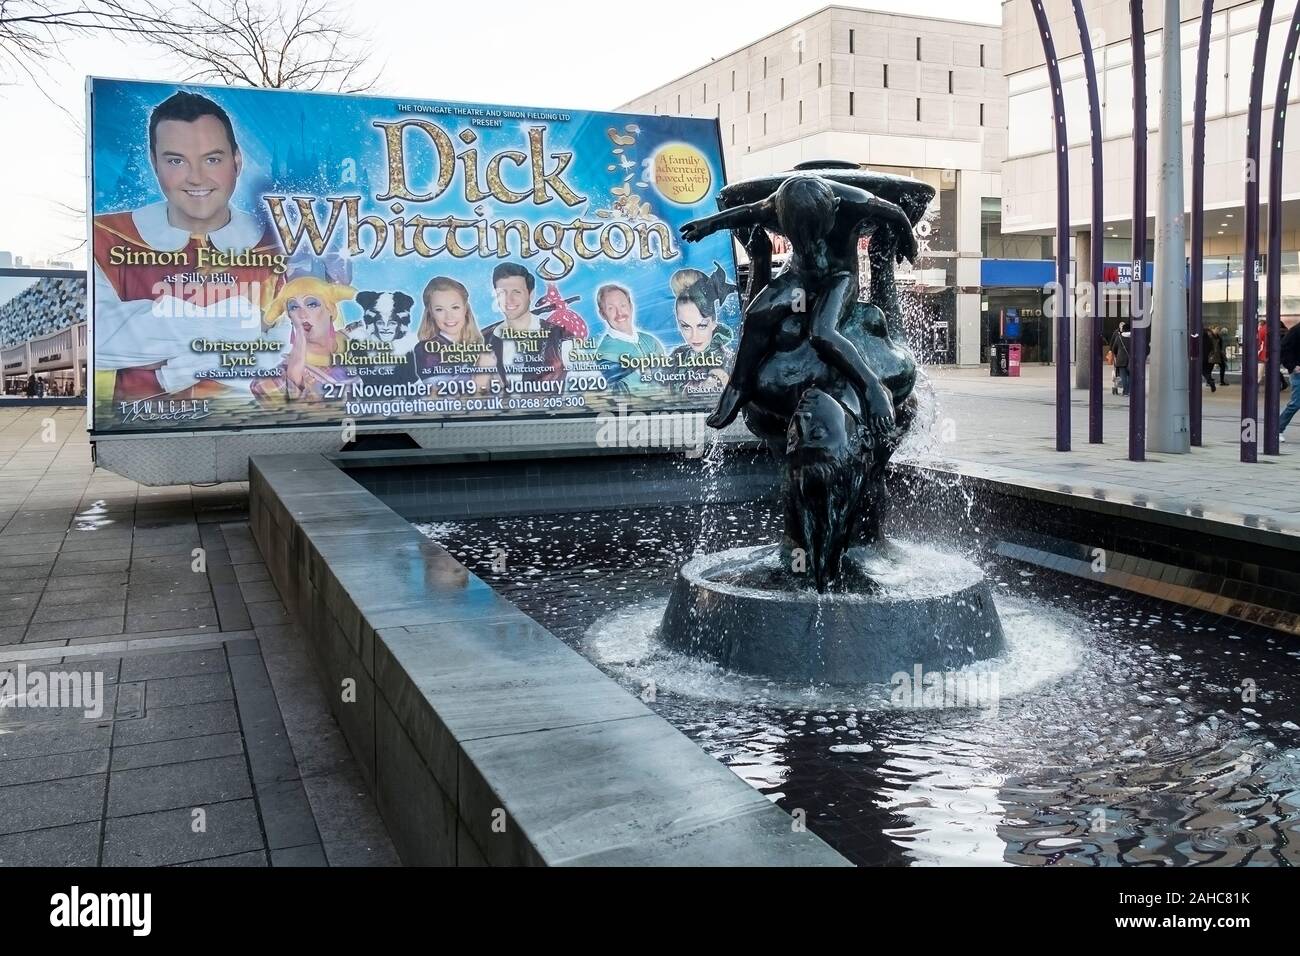 A large advertising hoarding for the Christmas pantomime at the Towngate Theatre positioned next to the famous Mother and Child sculpture fountain in Stock Photo